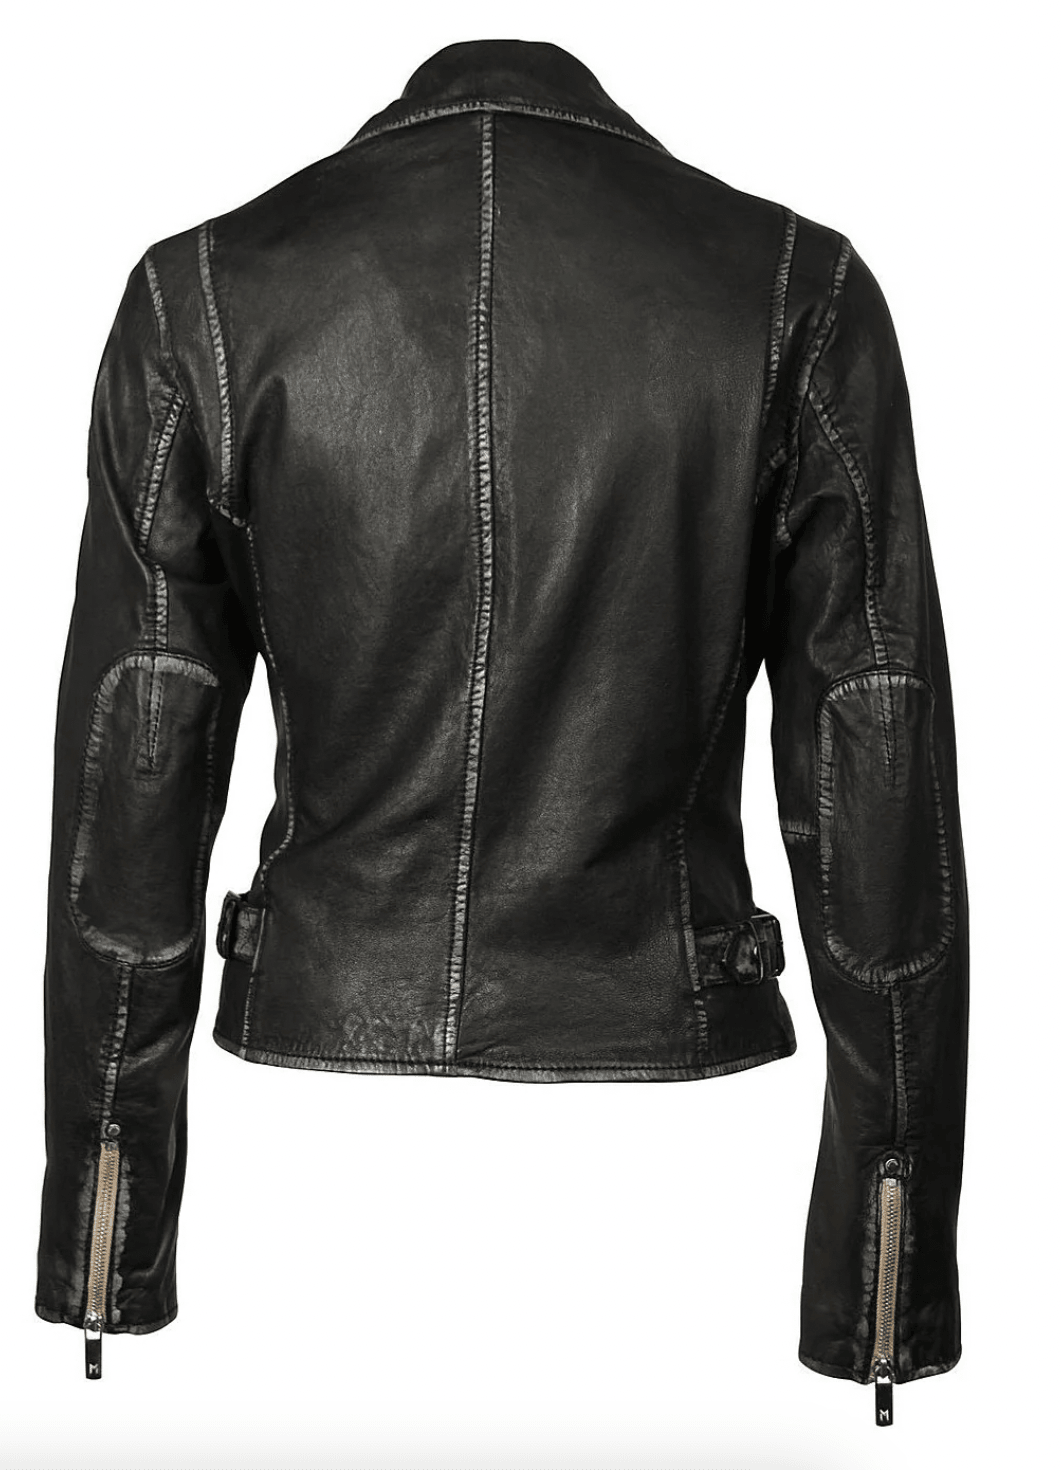 Sofia Leather Jacket by Mauritius - Haven